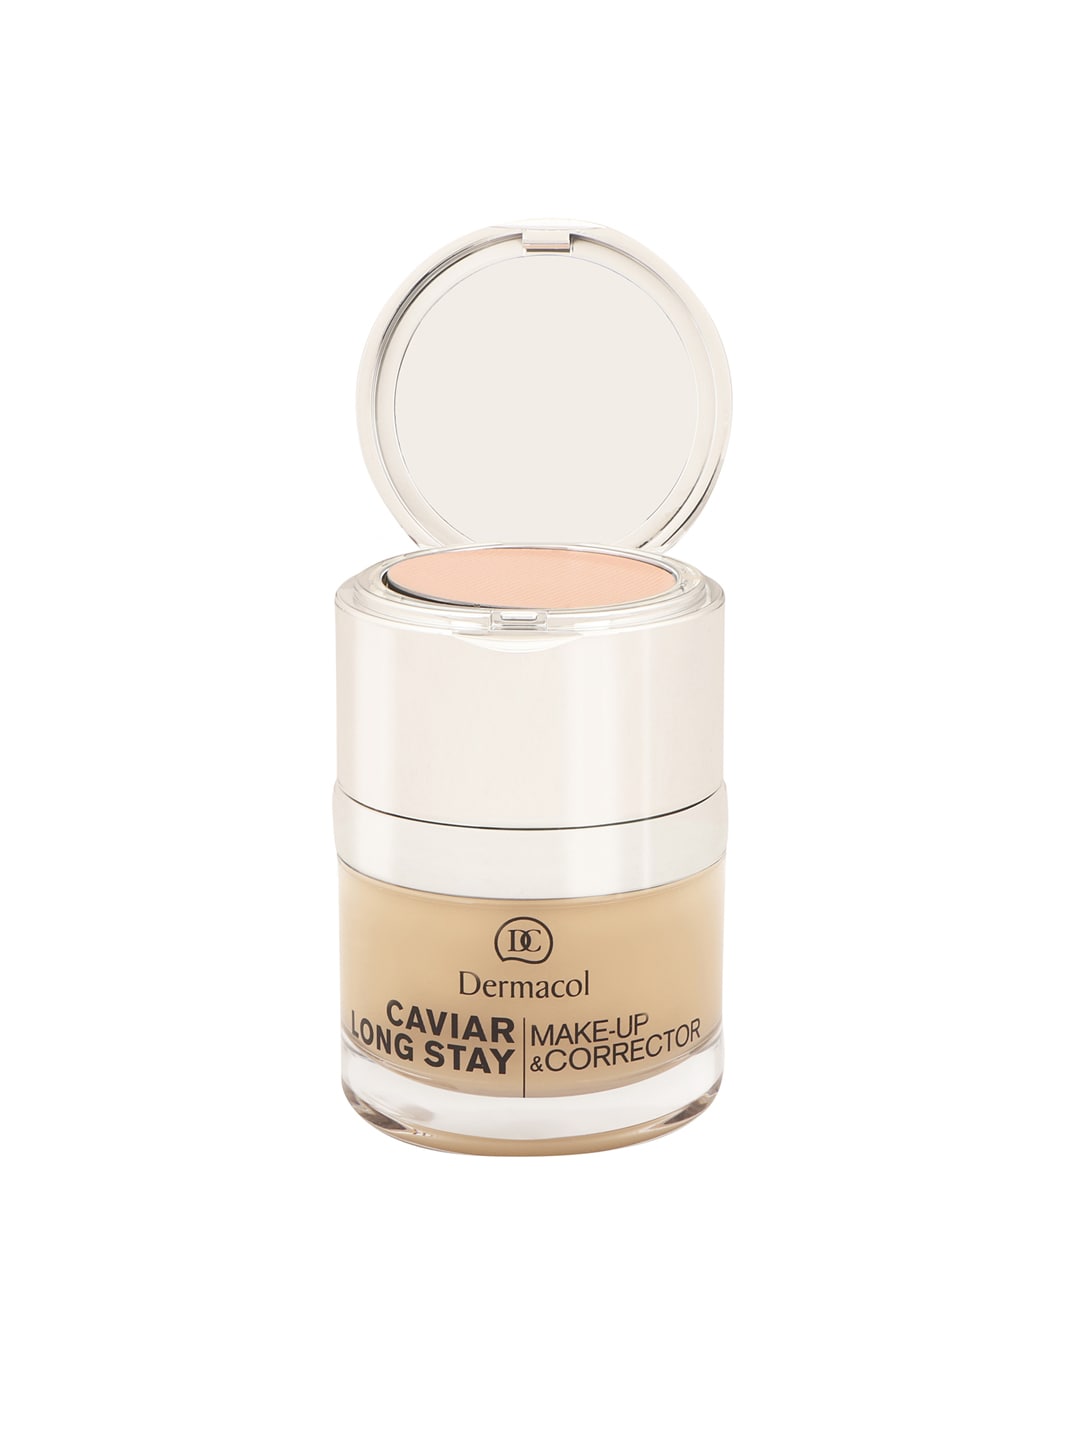 Dermacol 2-IN-1 Long Lasting Make-up & Corrector With Caviar Extract No.4 Tan Price in India